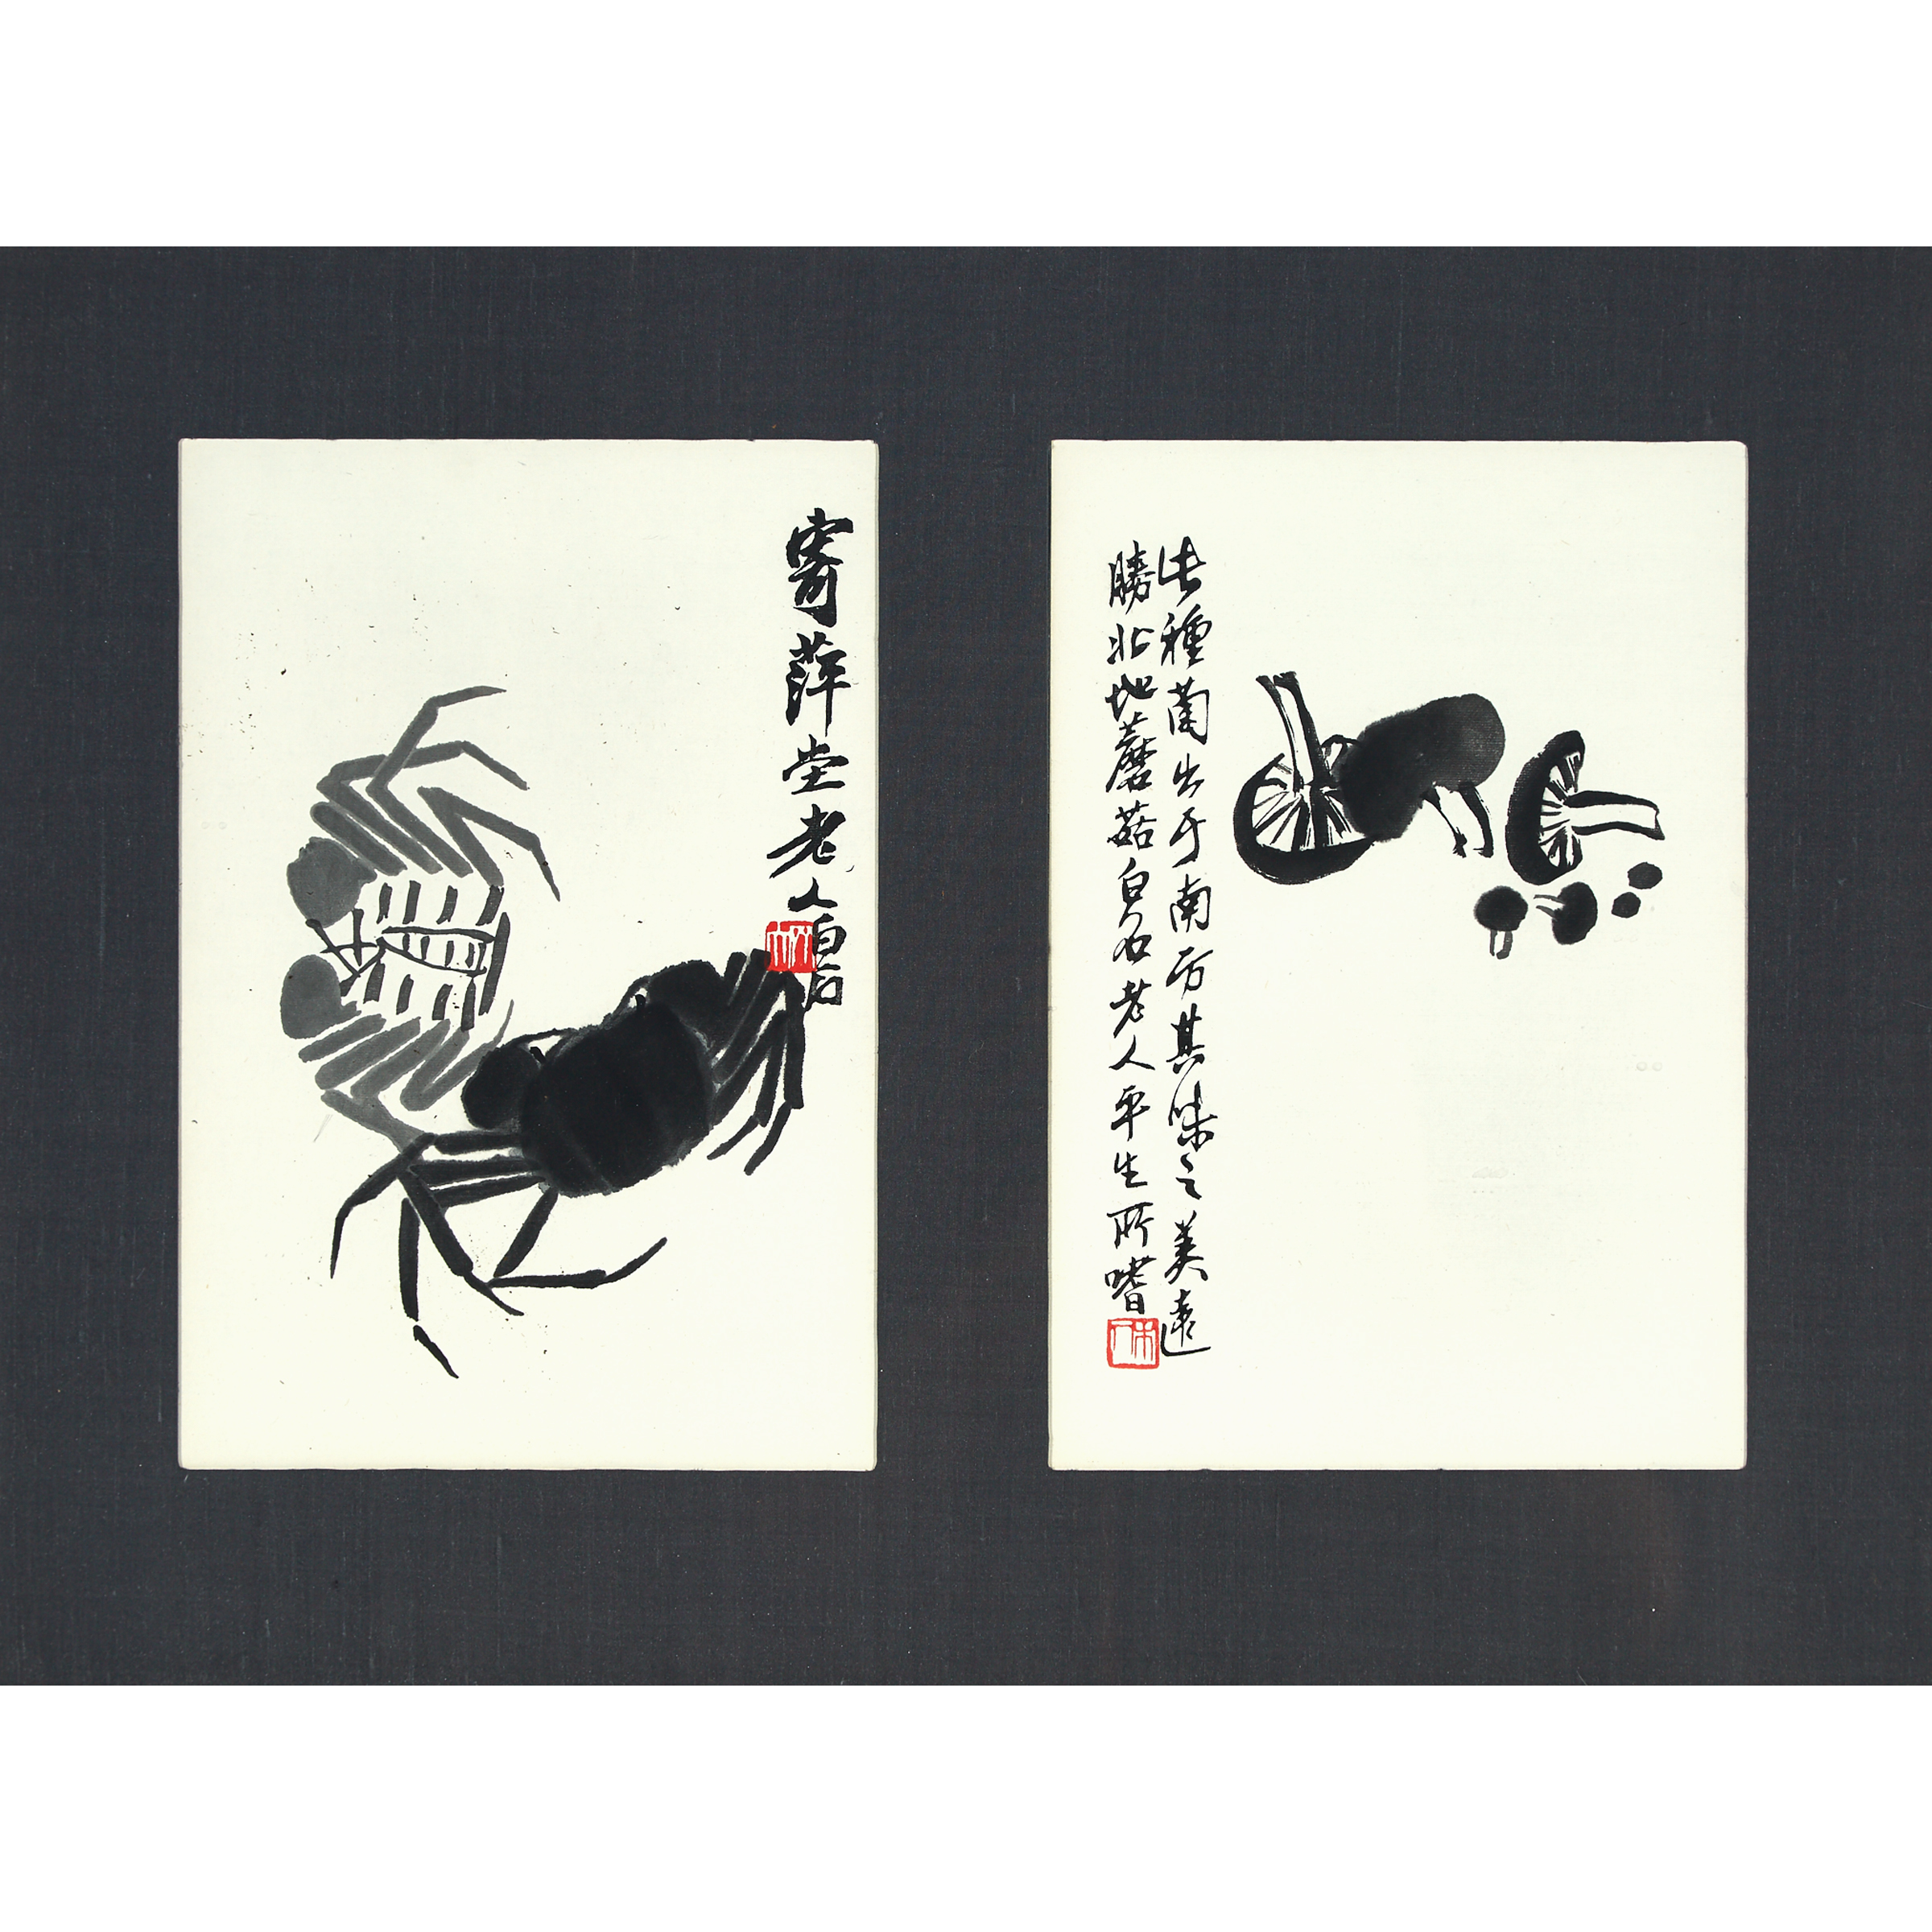 After Qi Baishi (1864-1957), A Group of Four Woodblock Prints